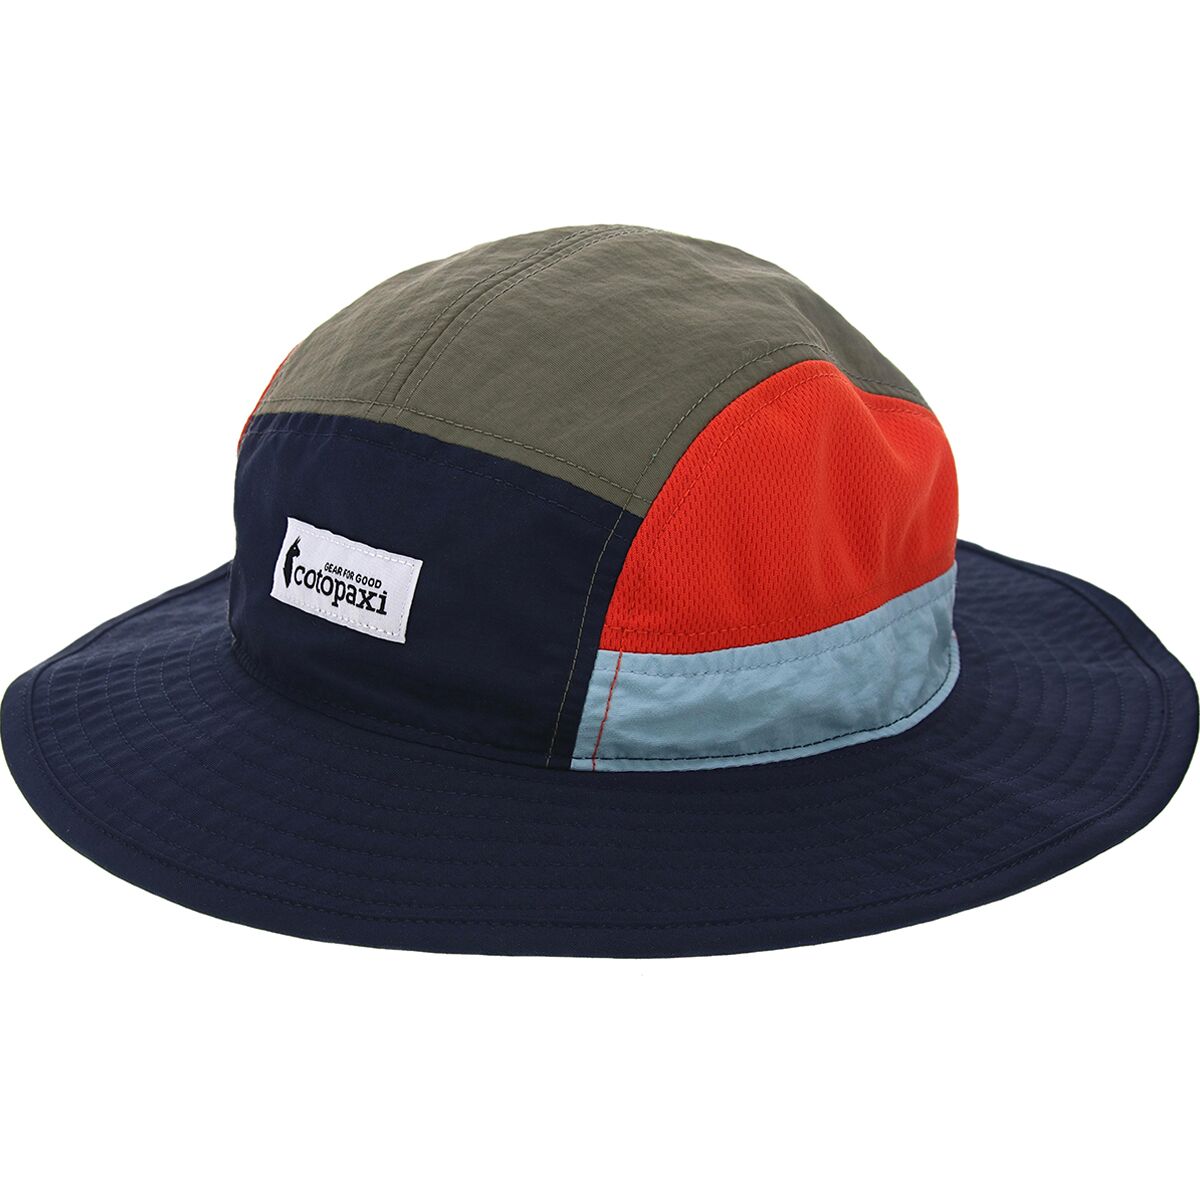 Campos Bucket Hat by Cotopaxi | US-Parks.com